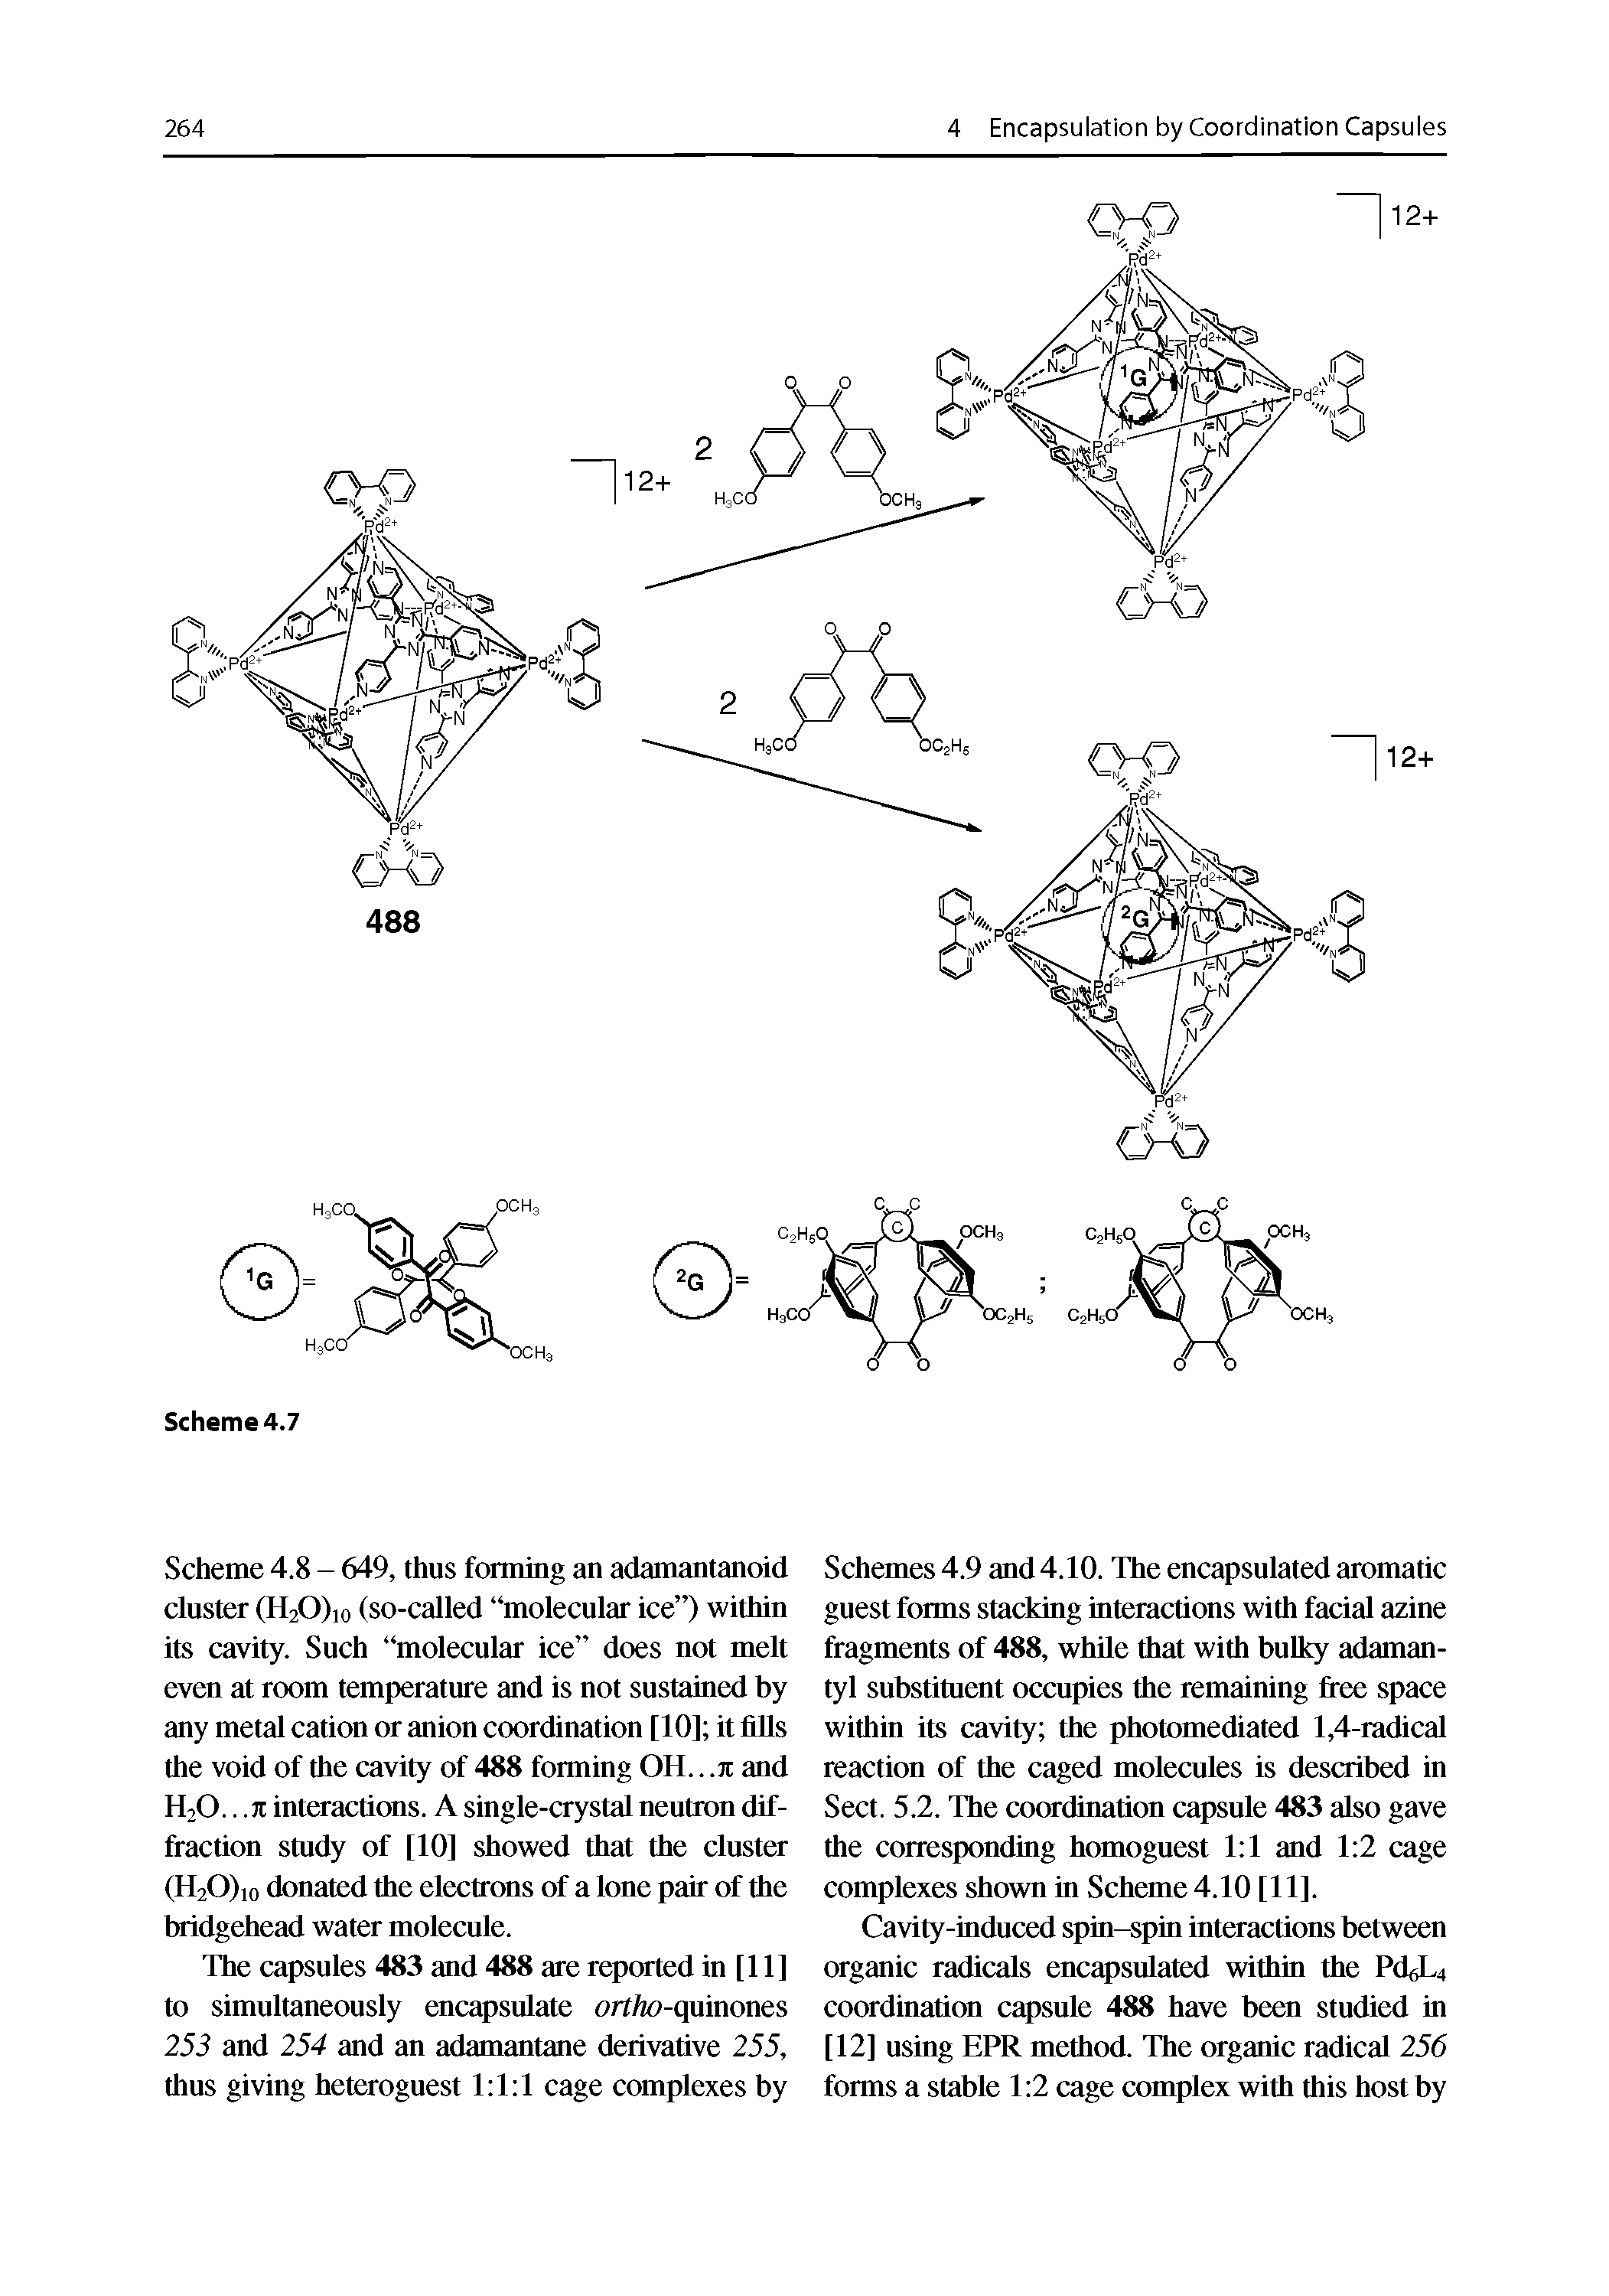 Schemes 4.9 and 4.10. The encapsulated aromatic guest forms stacking interactions with facial azine fragments of 488, while that with bulky adaman-tyl substiment occupies the remaining free space within its cavity the photomediated 1,4-radical reaction of the caged molecules is described in Sect. 5.2. The coordination capsule 483 also gave the corresponding homoguest 1 1 and 1 2 cage complexes shown in Scheme 4.10 [11].